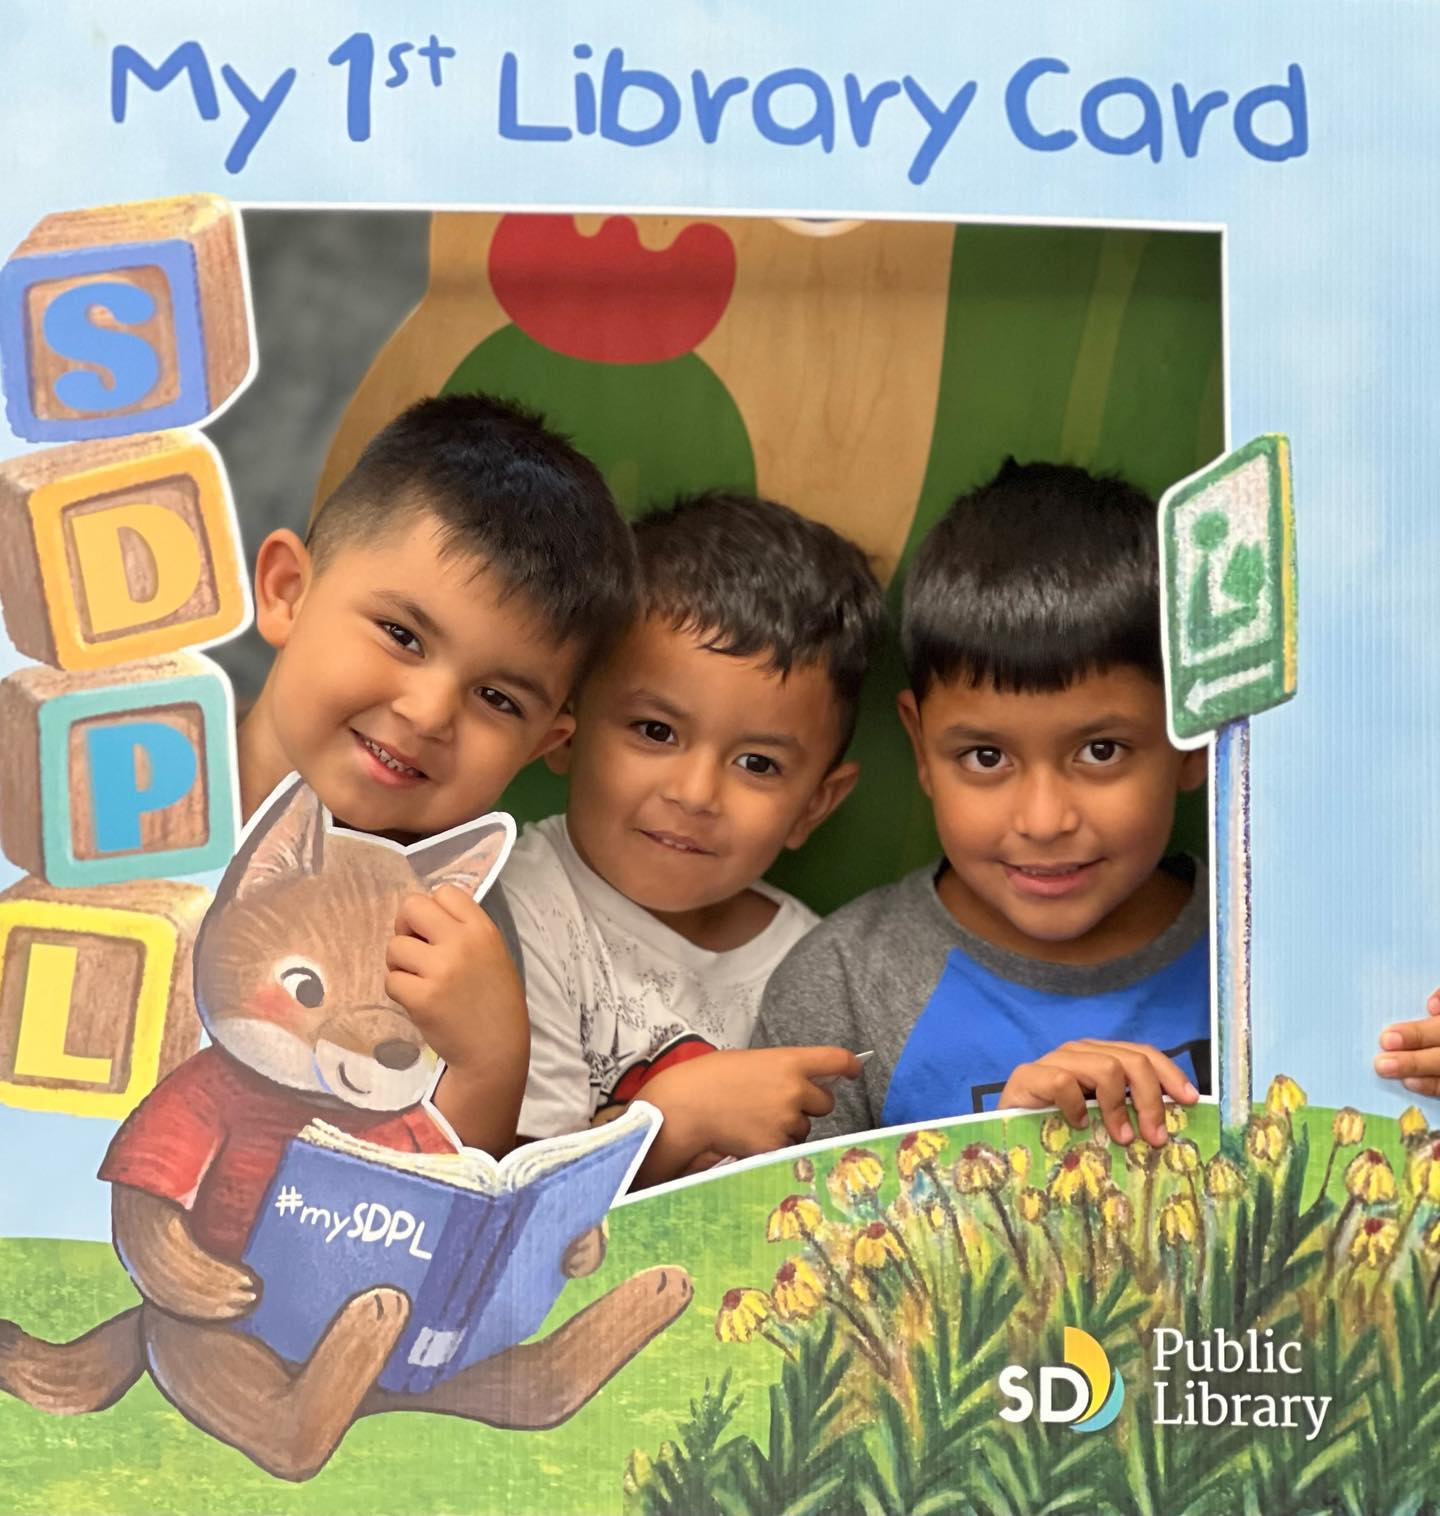 three young boys posing with a My 1st library card photo frame.